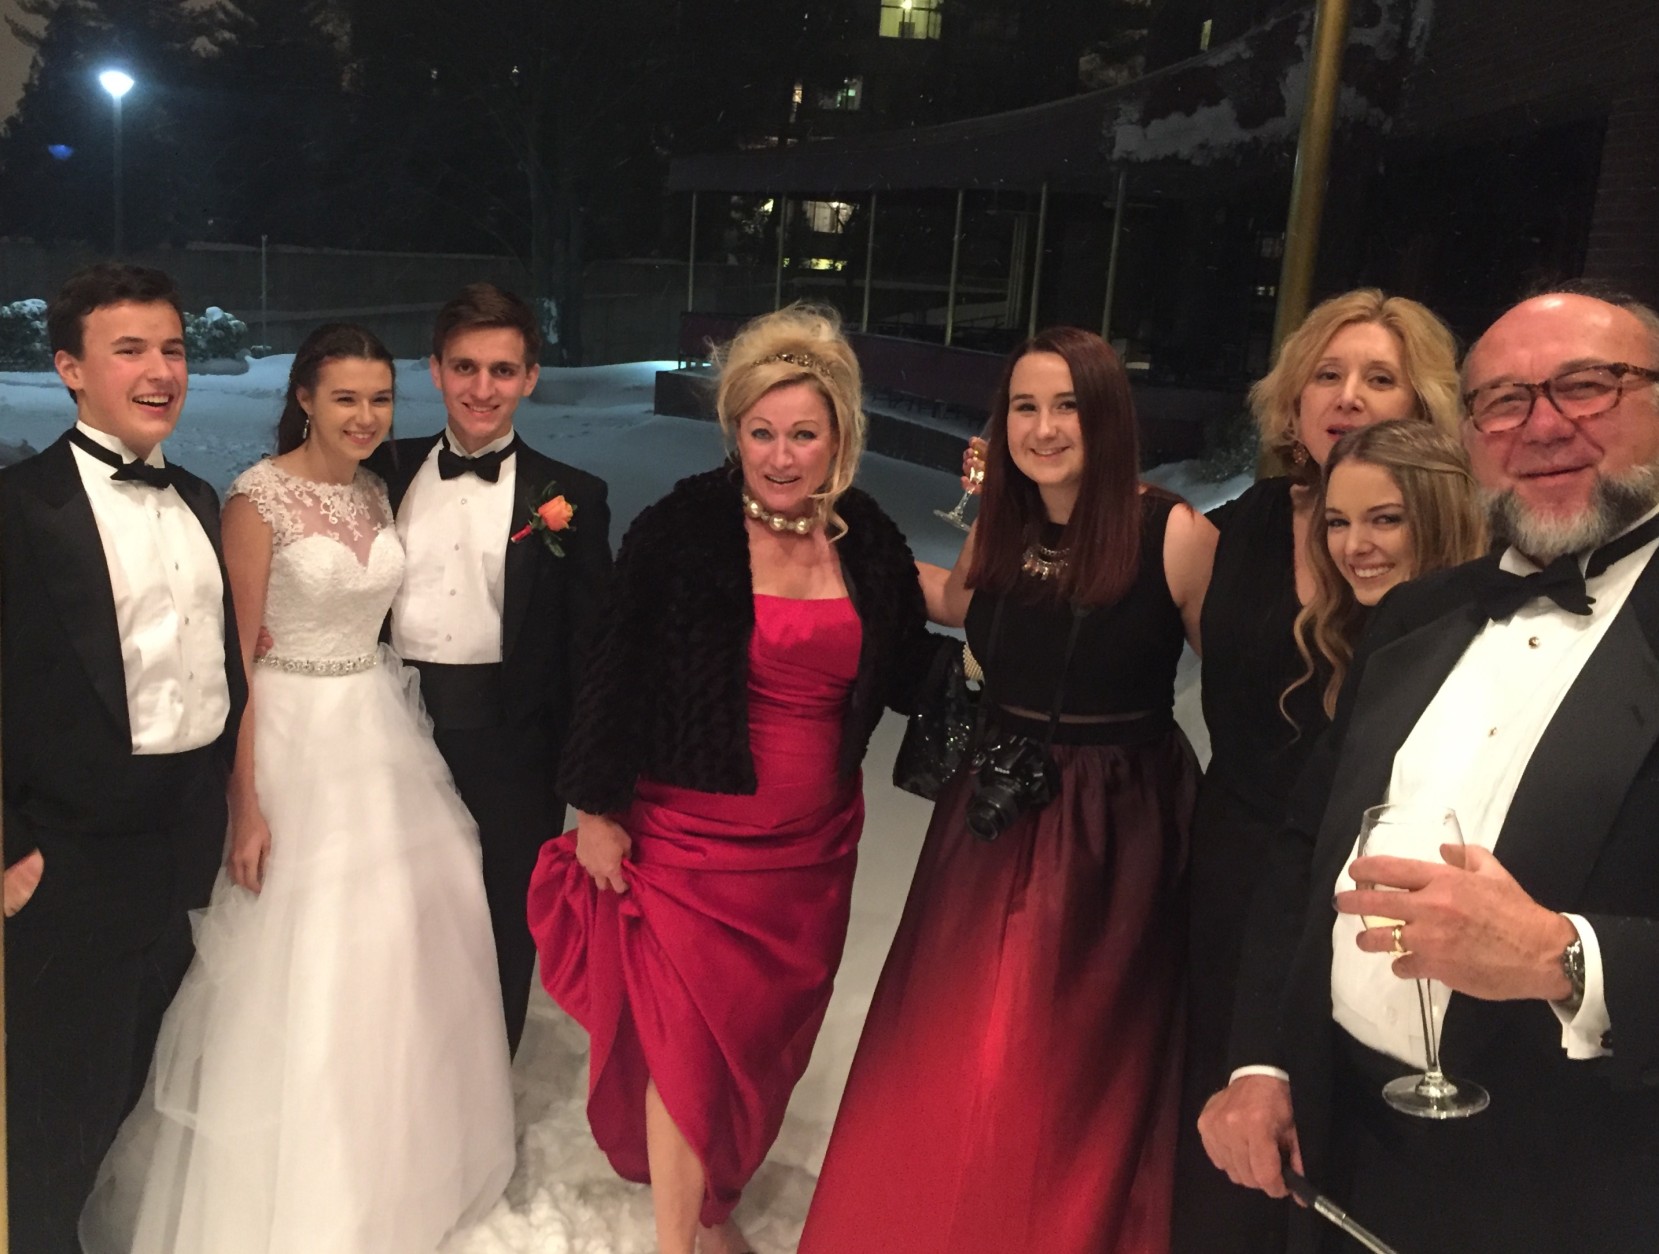 The family from Phoenix, Arizona was planning on celebrating a Ukrainian debutante ball in D.C., that is – before the blizzard hit. (WTOP/Mike Murillo)